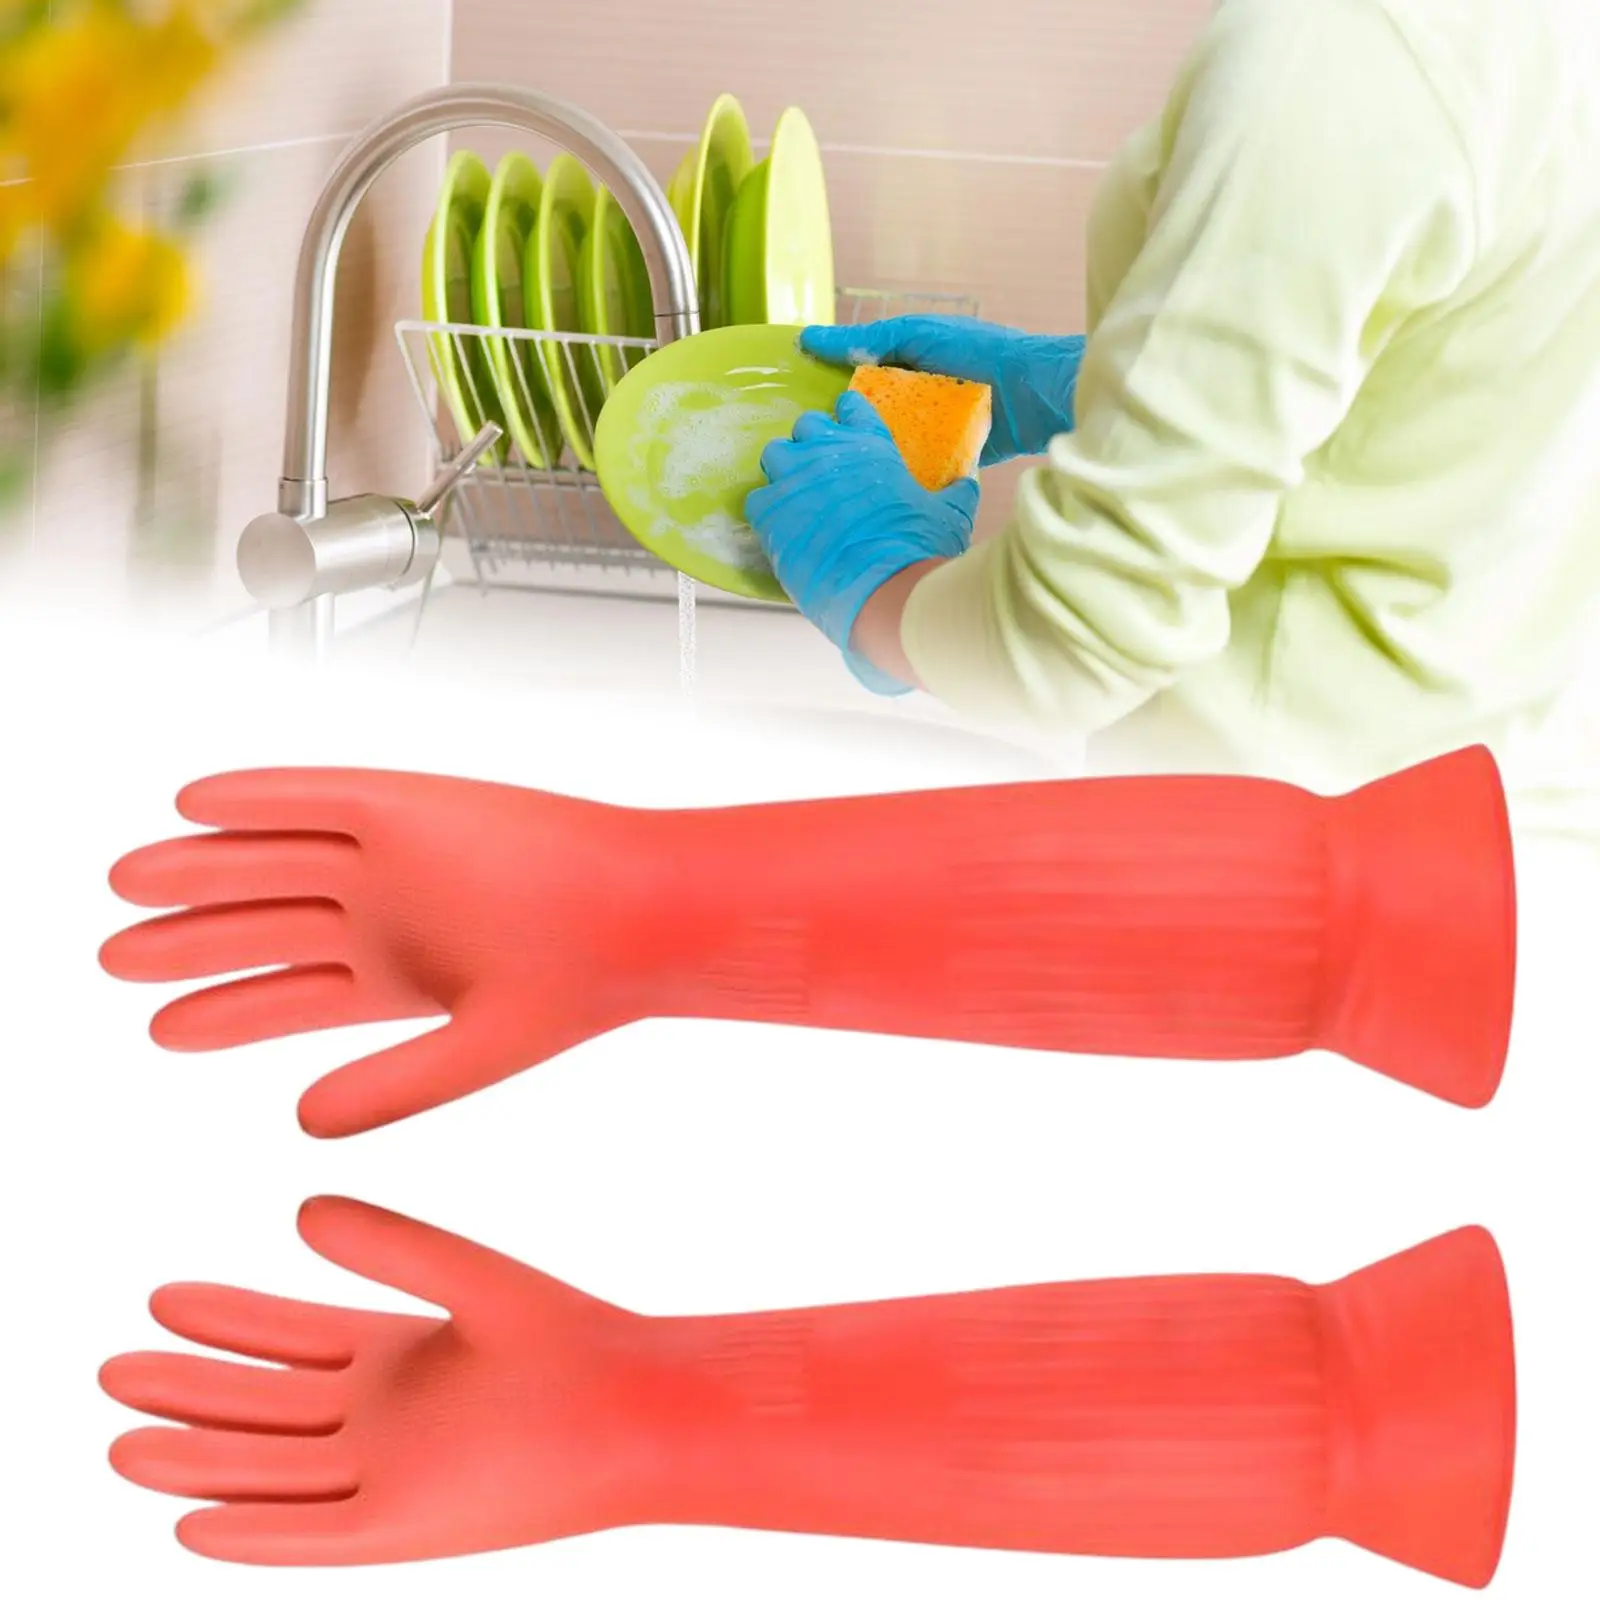 1 Pair Household Dishwashing Clean Gloves Practical Laundry Gloves Soft Kitchen Clean Gloves for Painting Car Wash Washing